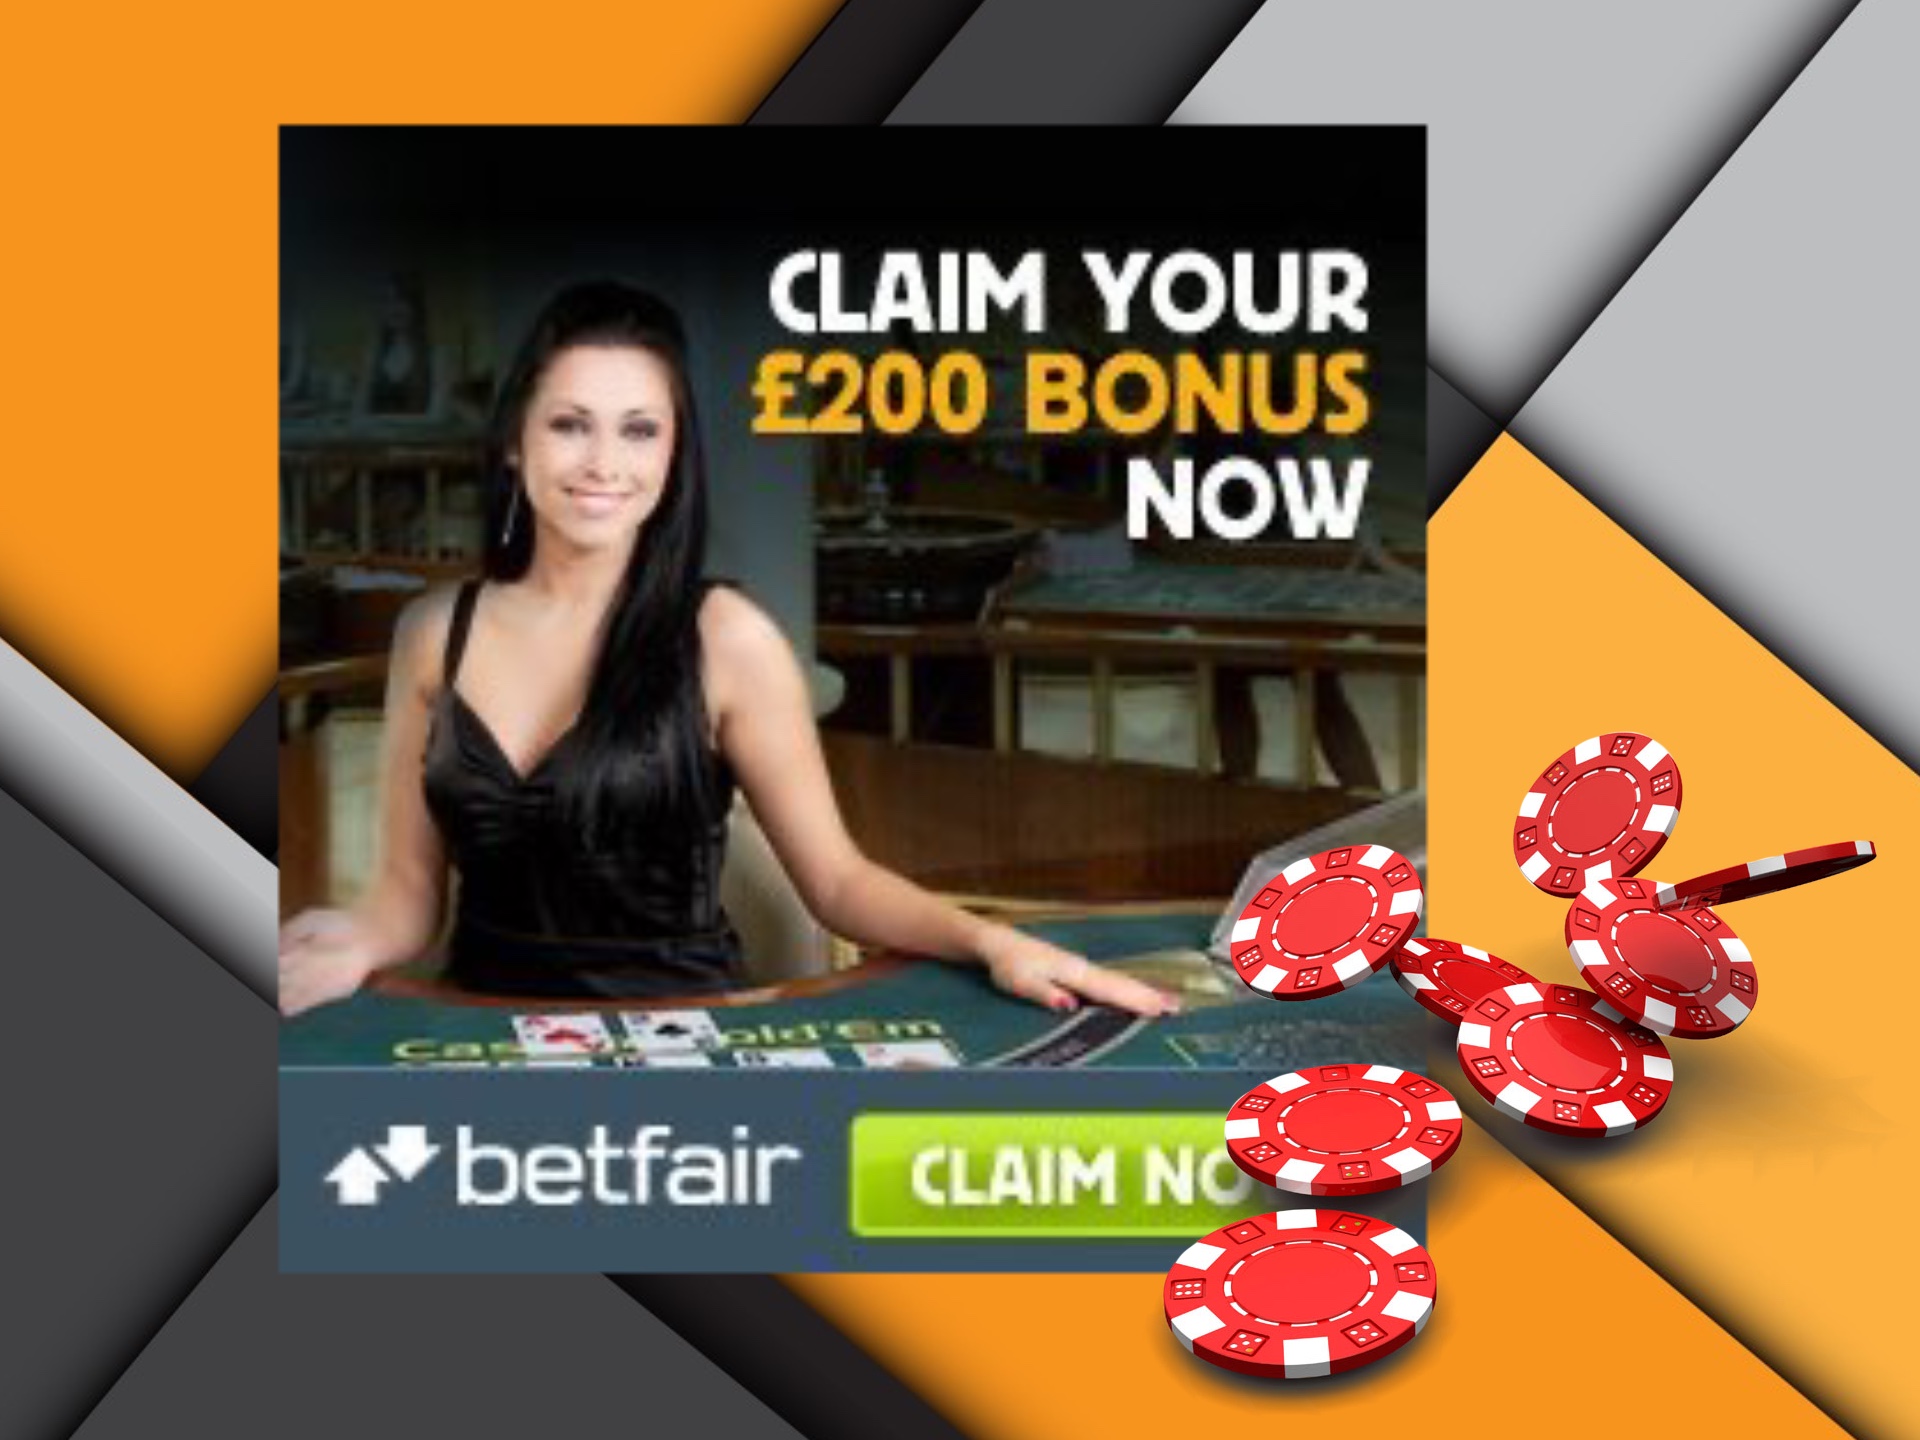 For those, who are fond of live casino games, there is a live caisno bonus at Betfair.